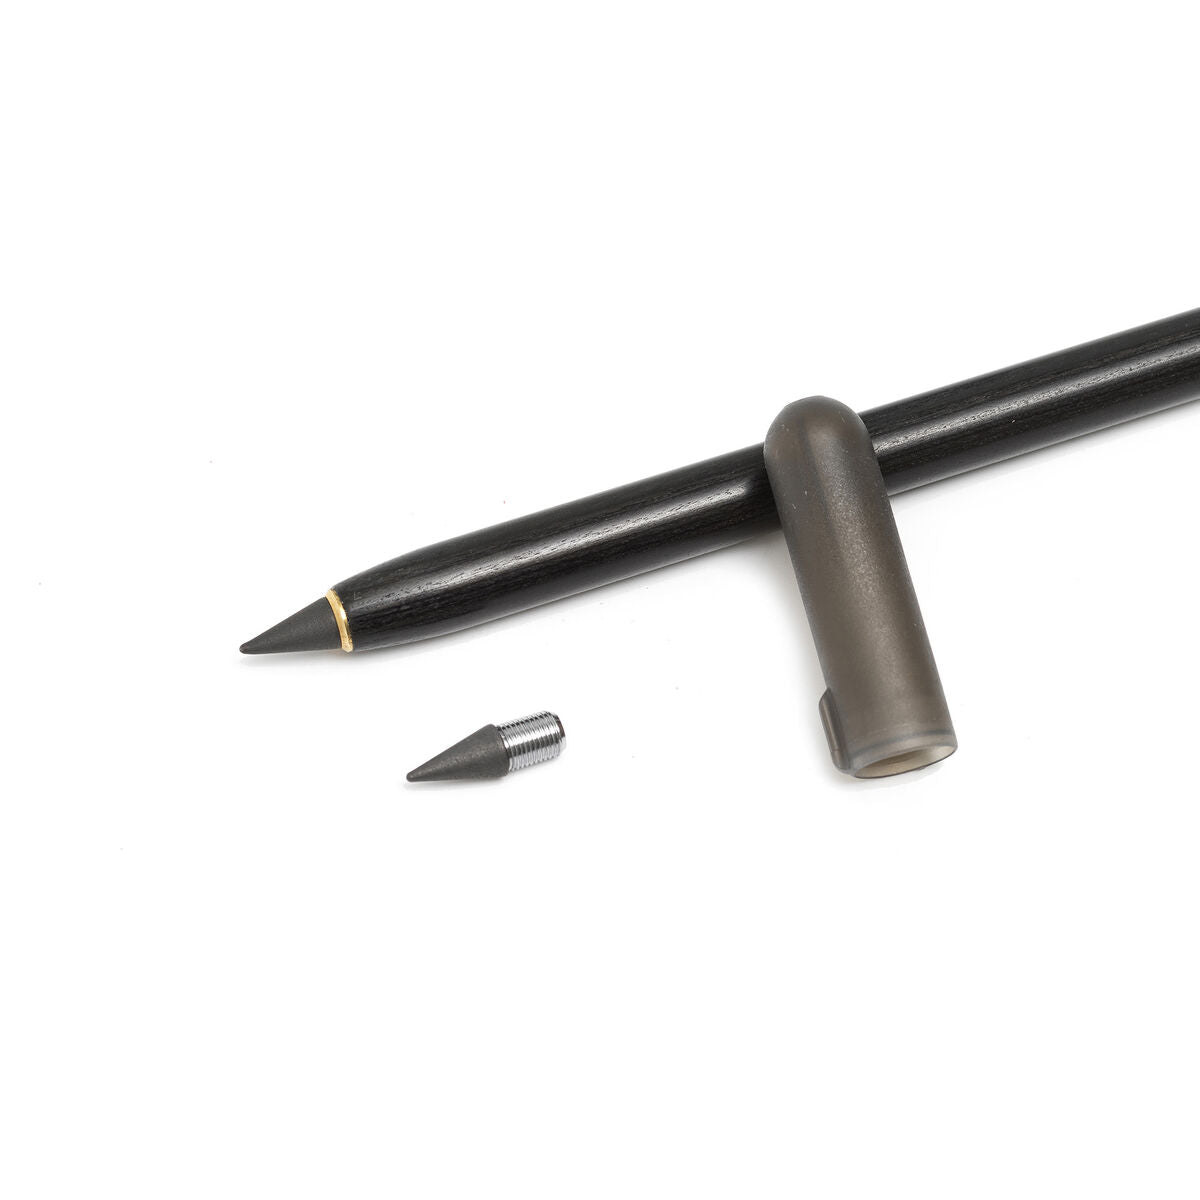 Stationery | Legami Magic Pencil by Weirs of Baggot Street